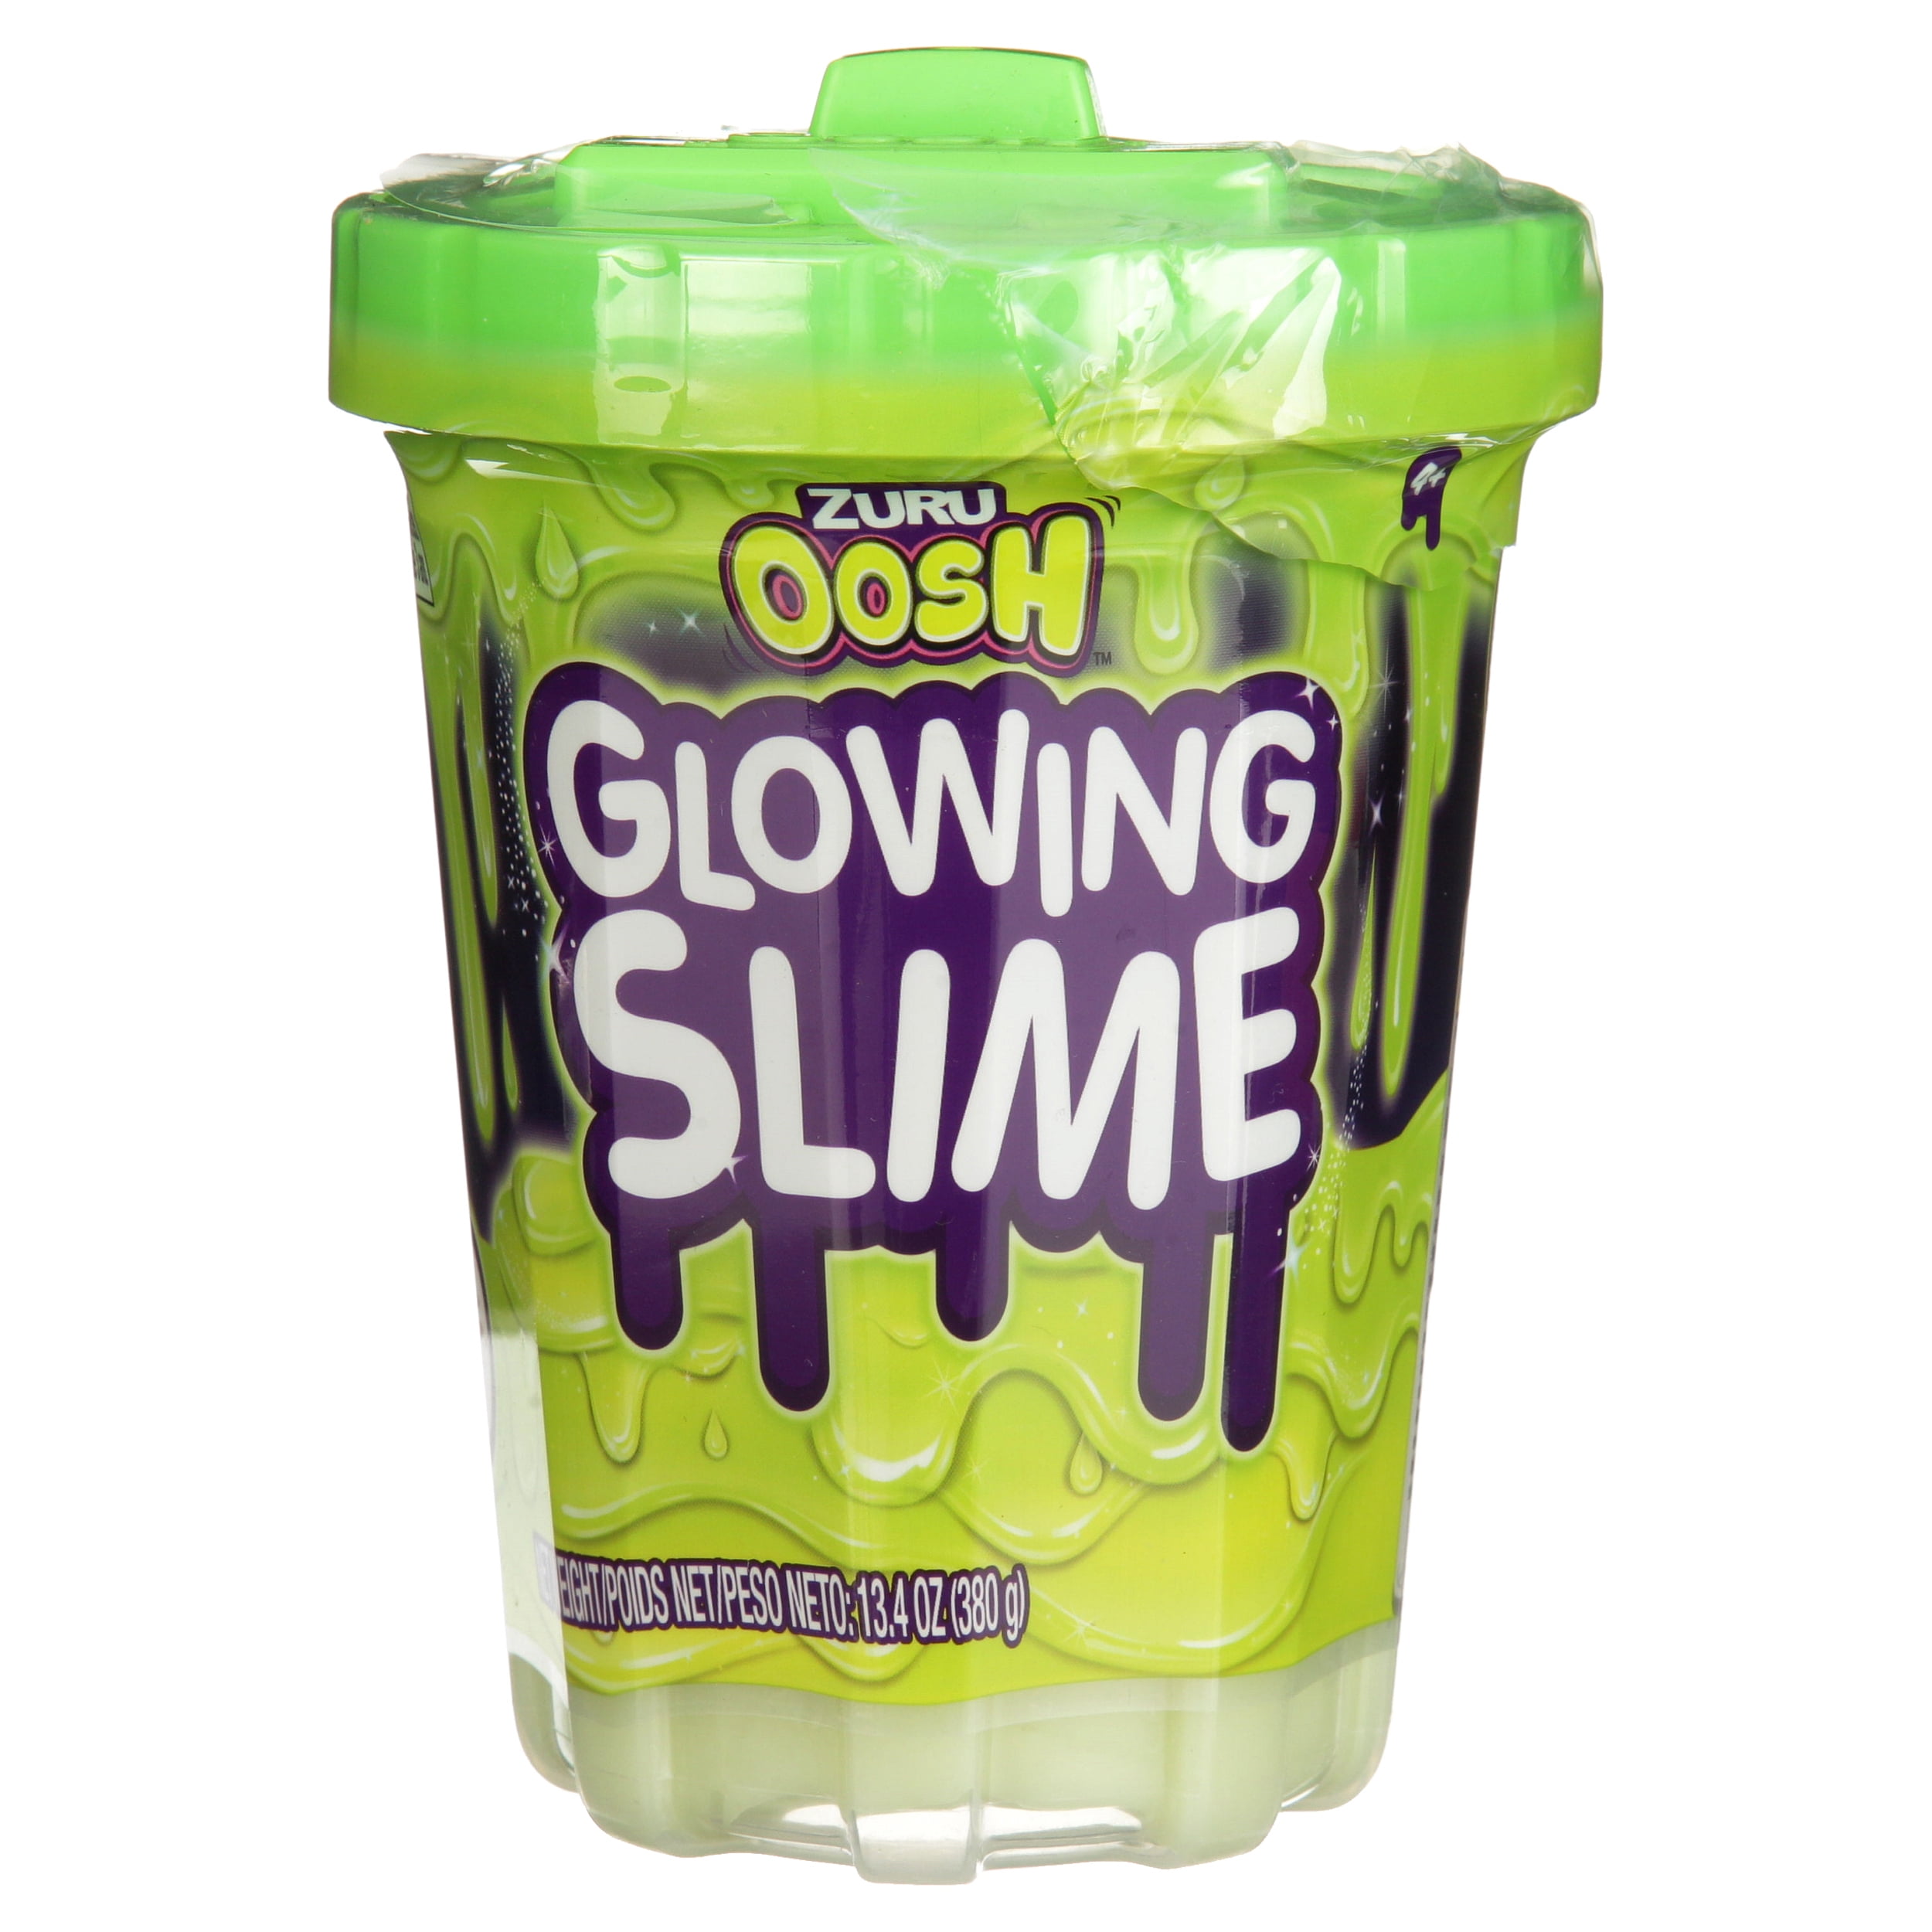 Oosh Glowing Slime Assorted Colors Lot of 3. 